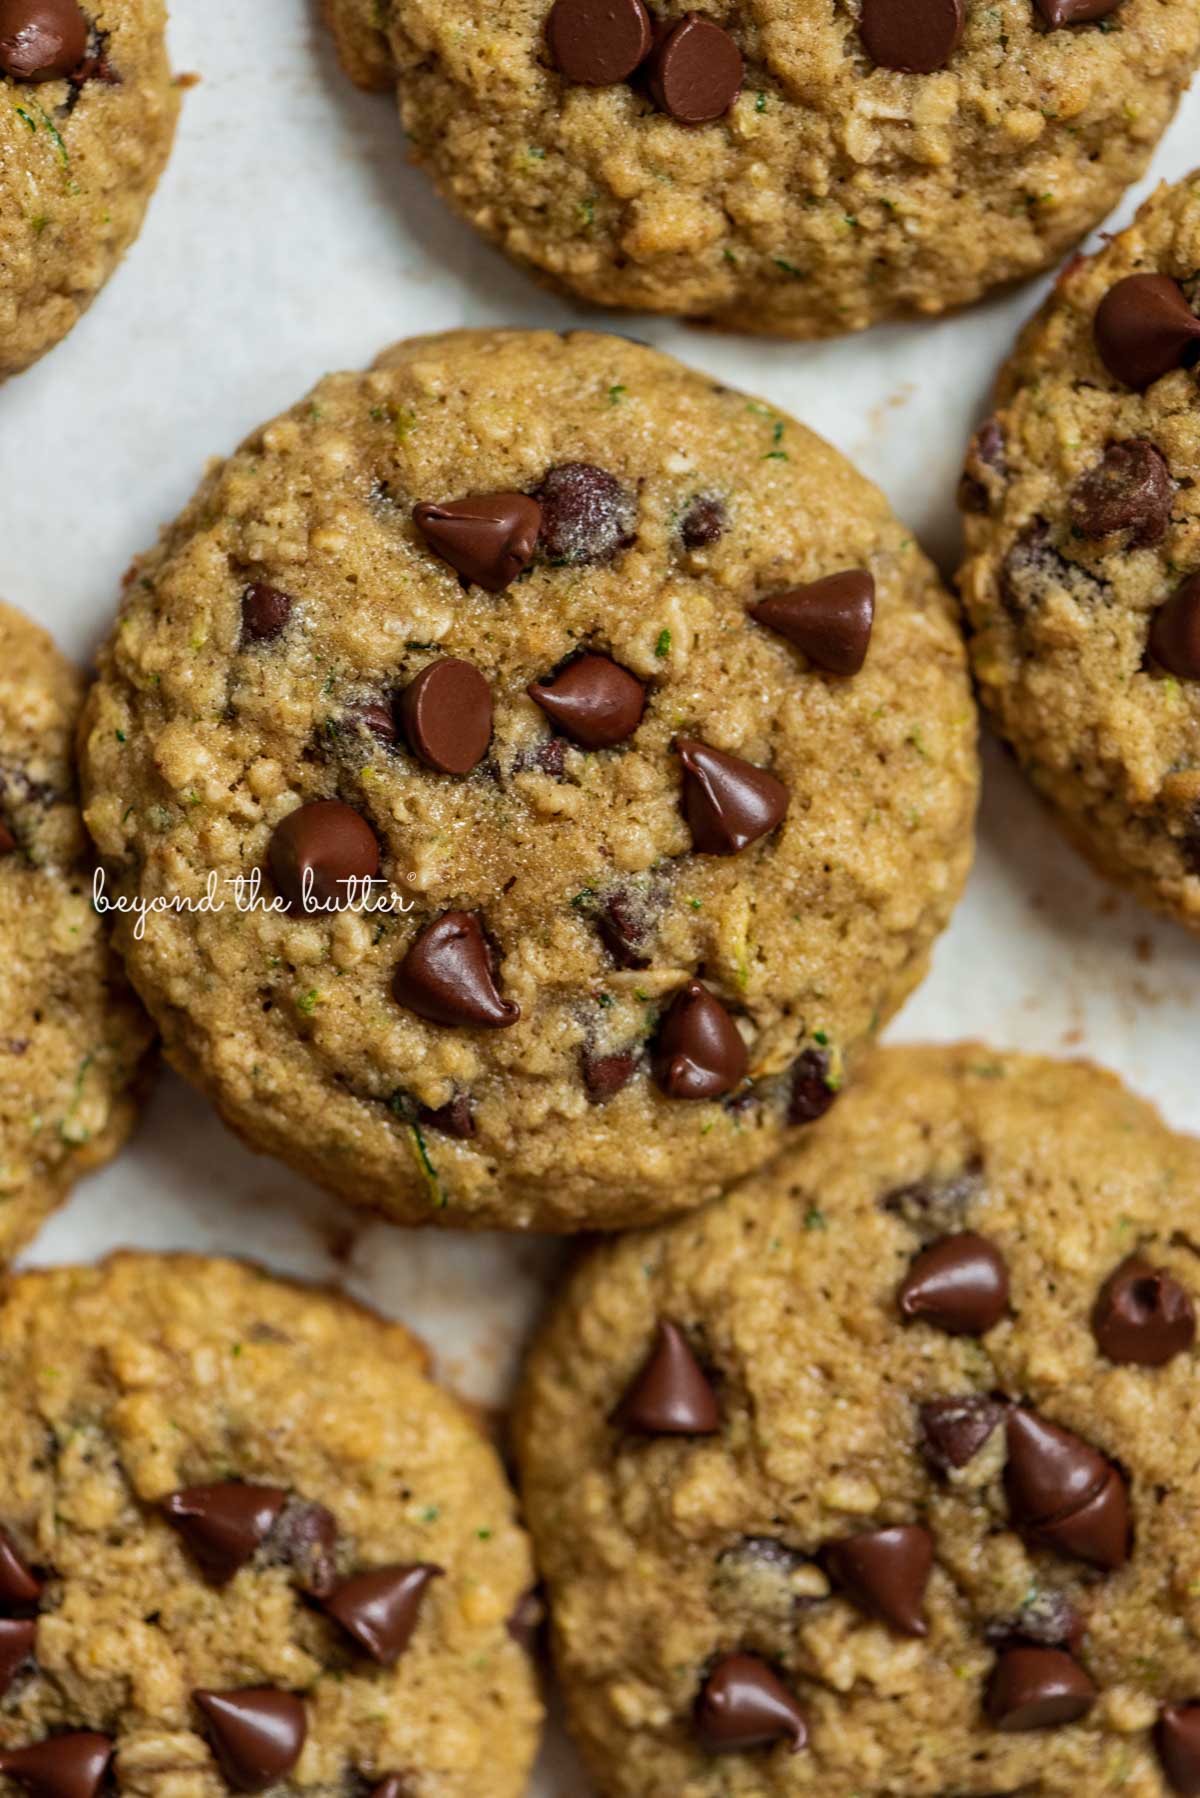 Zucchini chocolate chip oatmeal cookies on a parchment paper lined baking sheet.